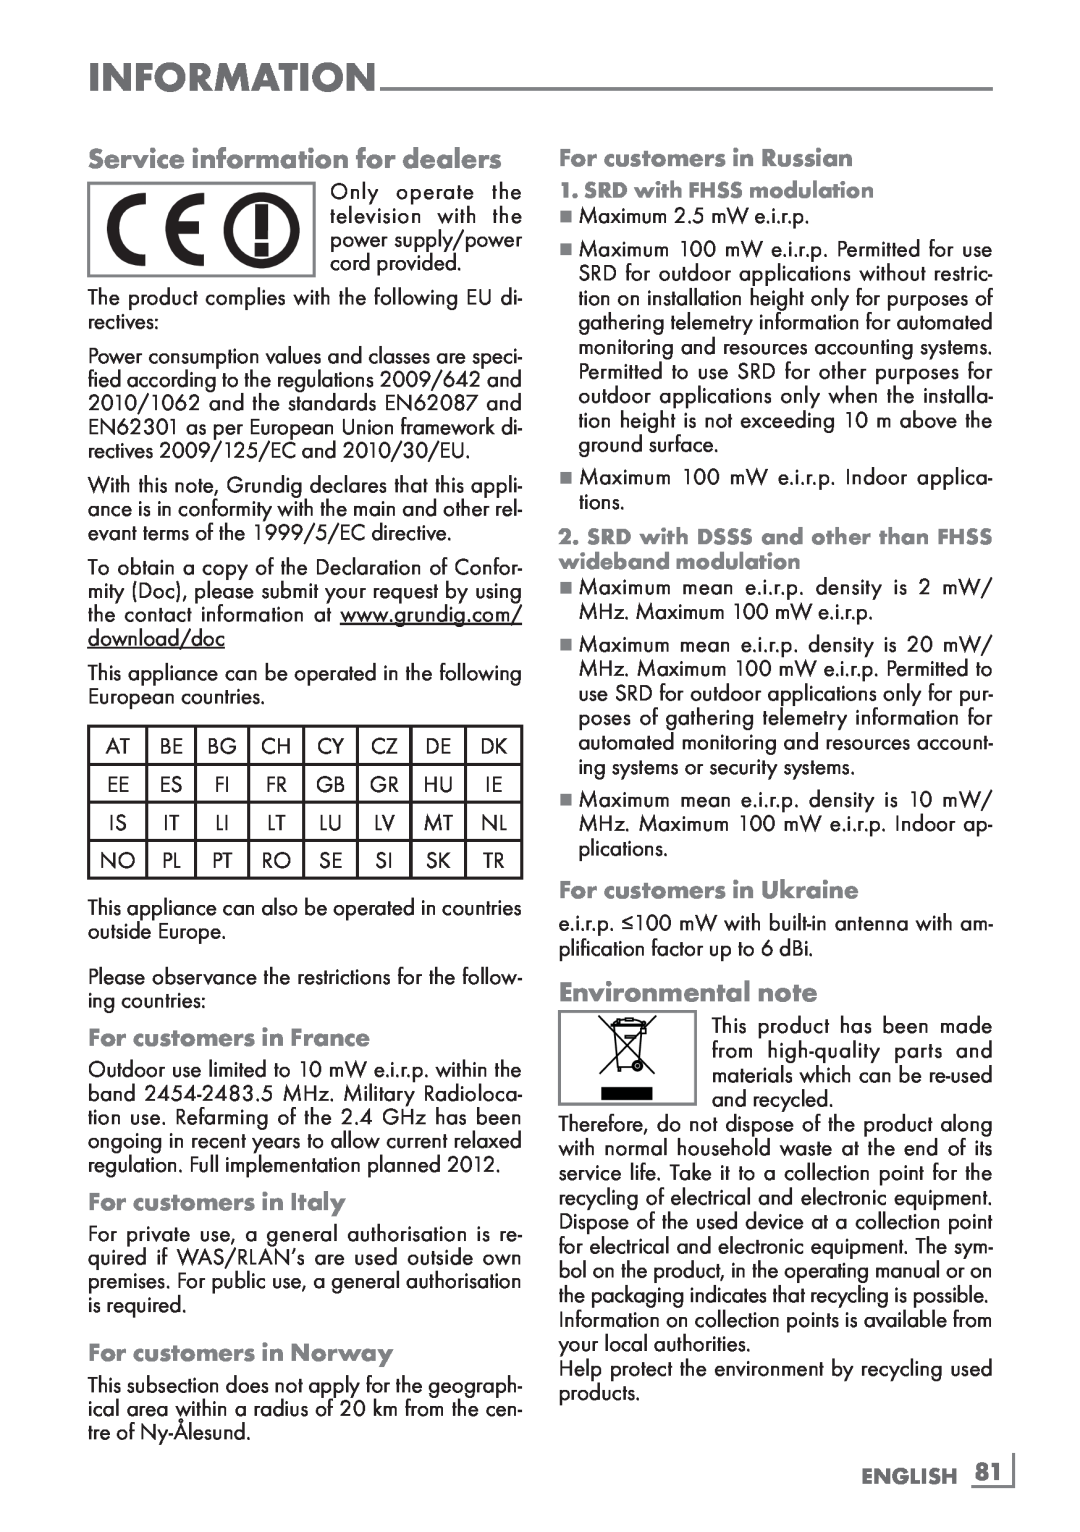 Grundig 40 VLE 8160 BL manual Service information for dealers, Environmental note, For customers in France, ENGLISH ­81 